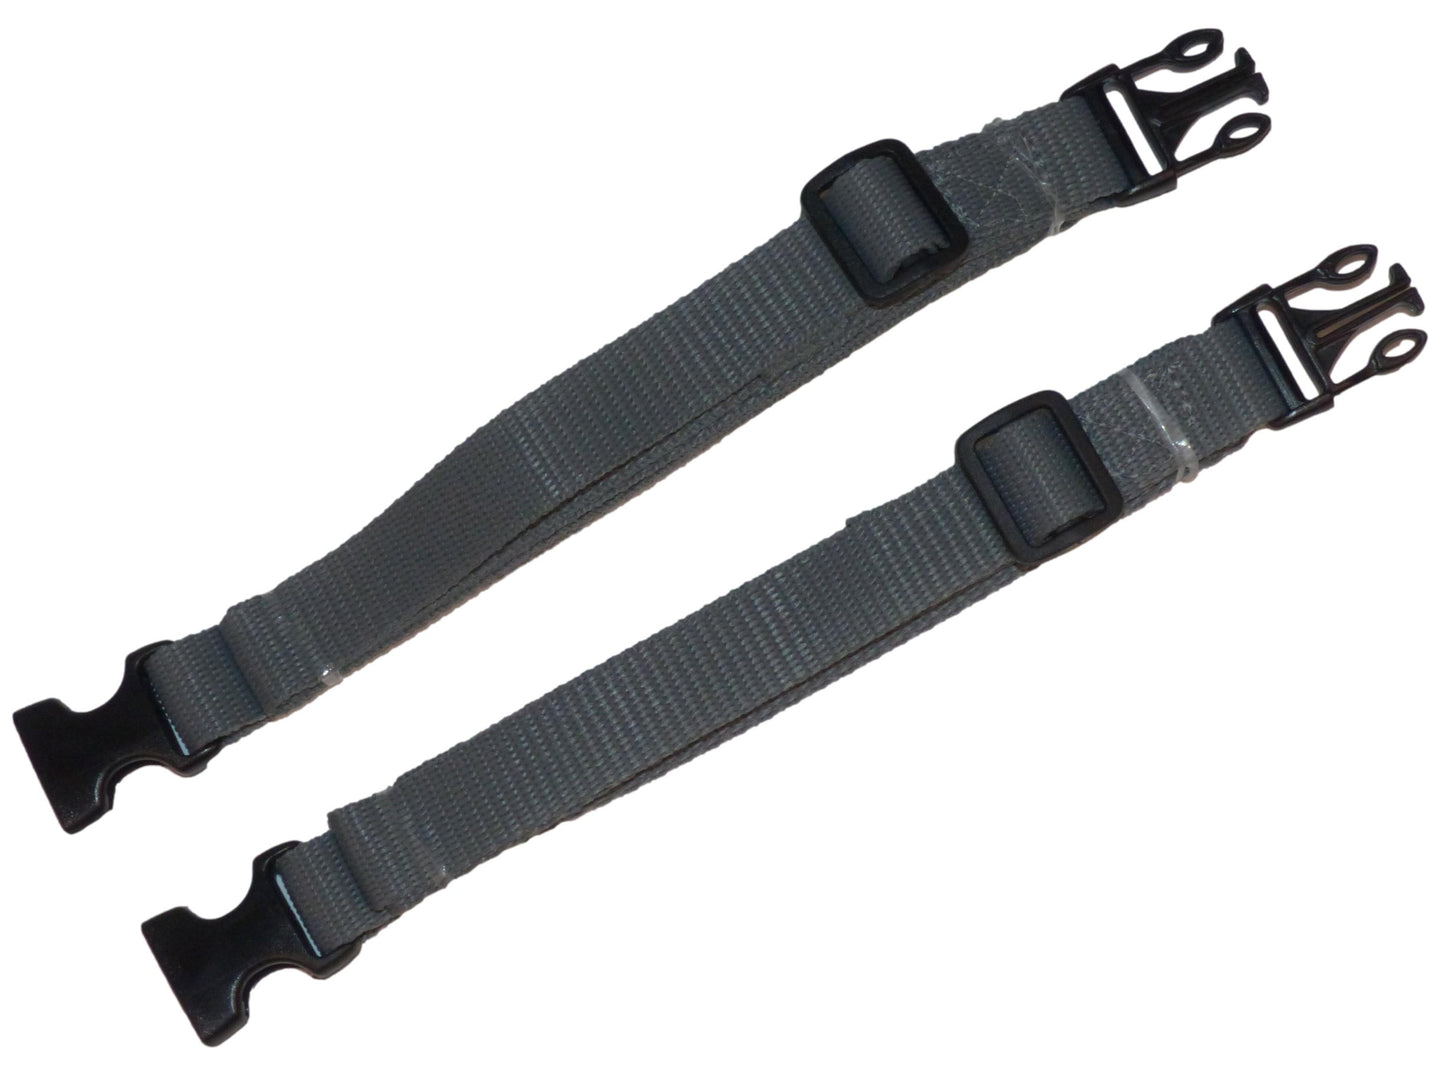 Benristraps 19mm Webbing Strap with Quick Release & Length-Adjusting Buckles (Pair)